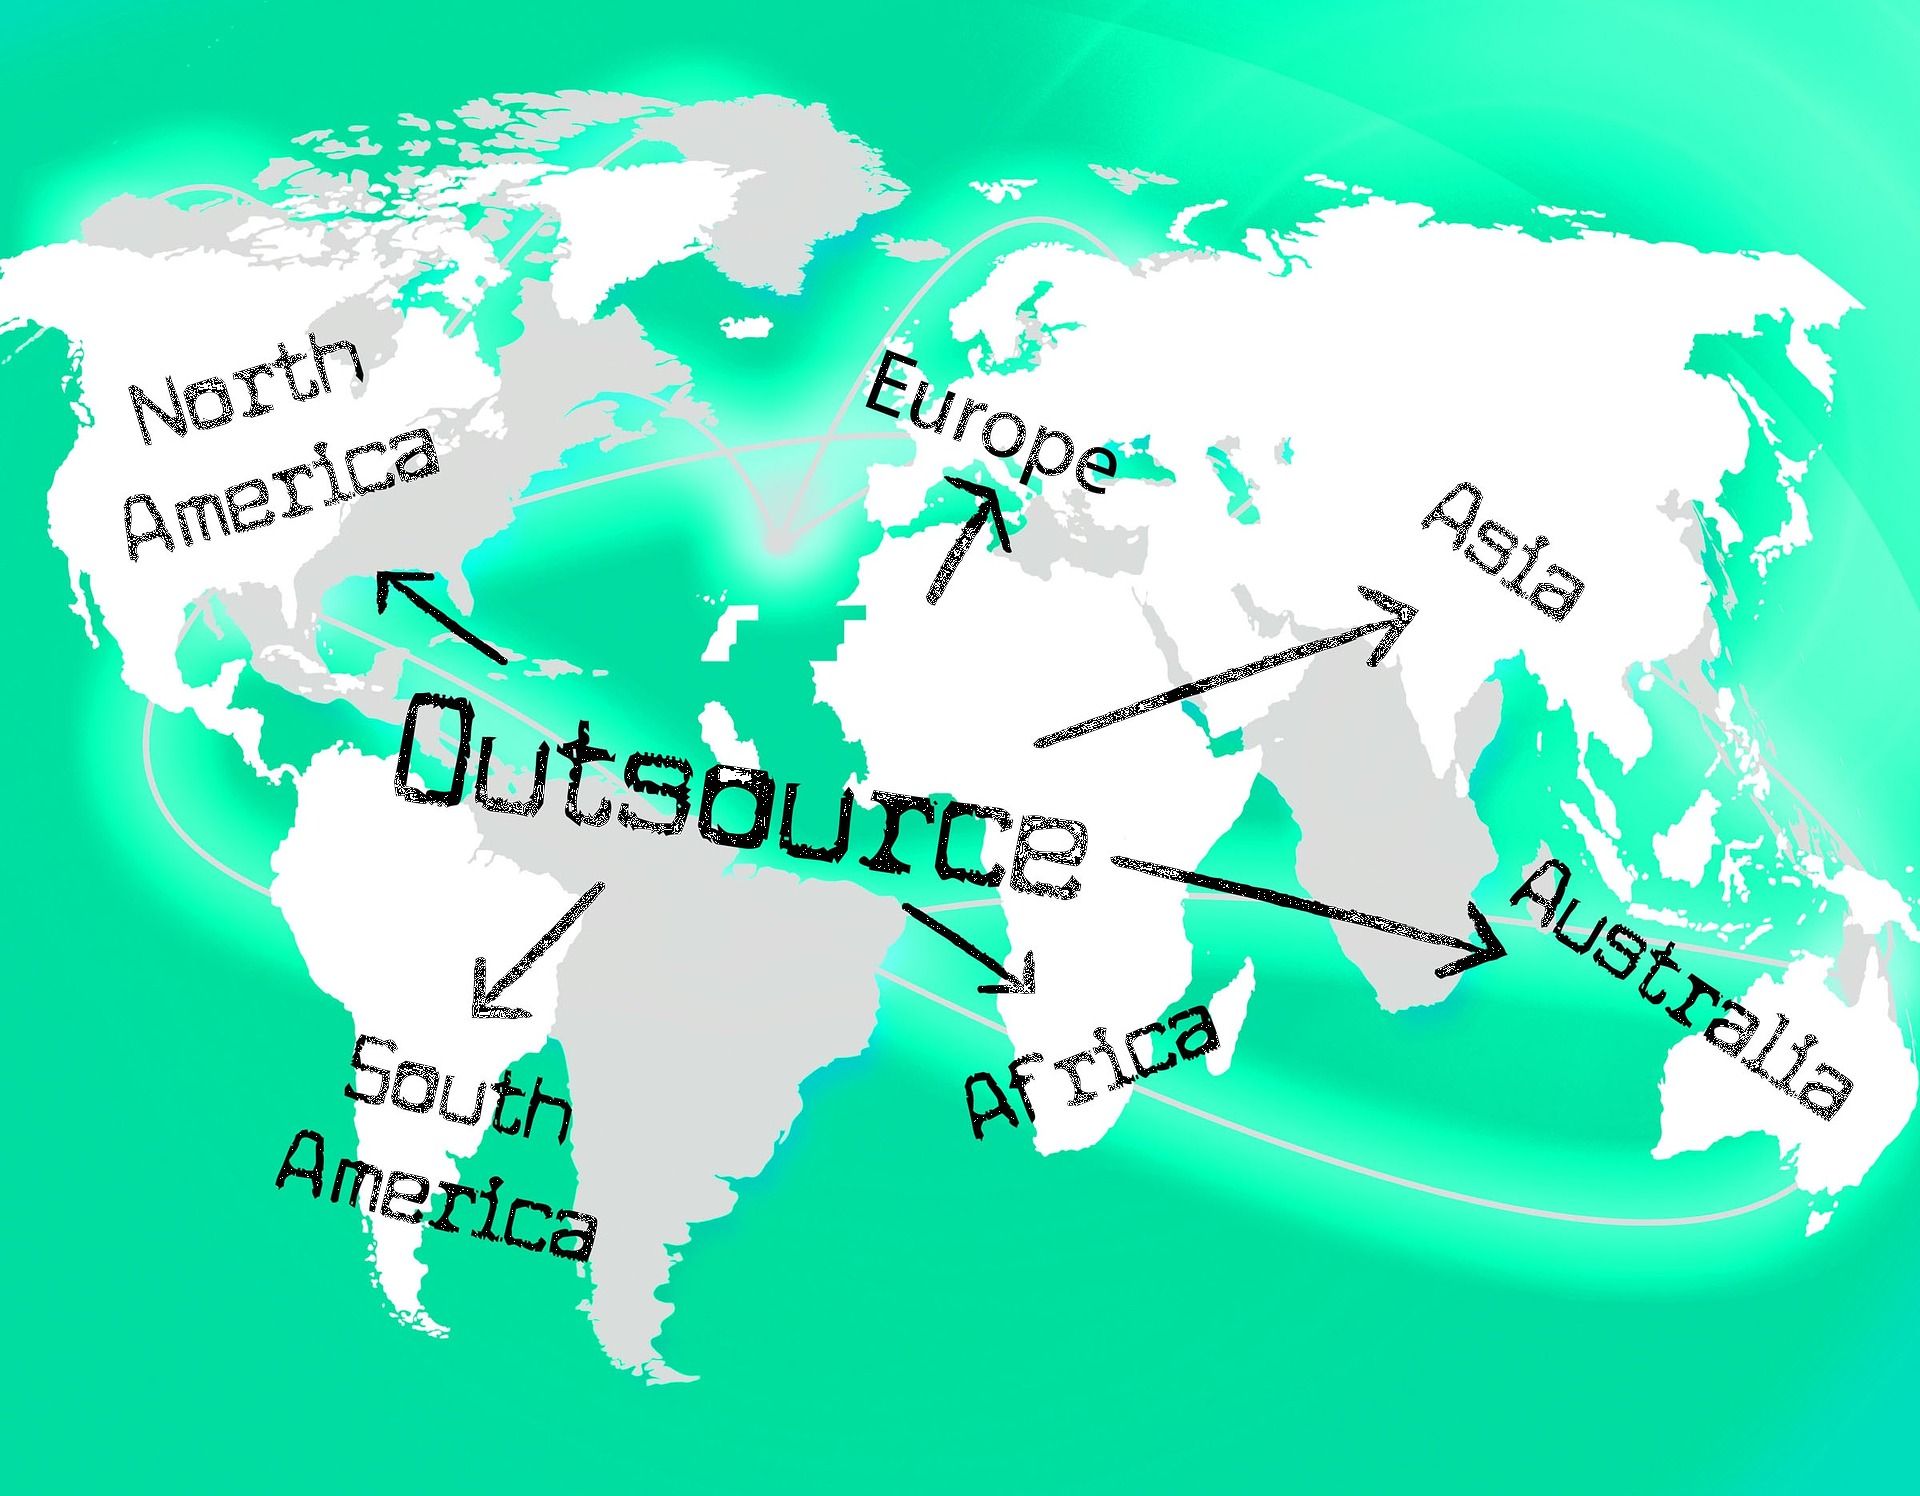 ADVANTAGES OF OUTSOURCING